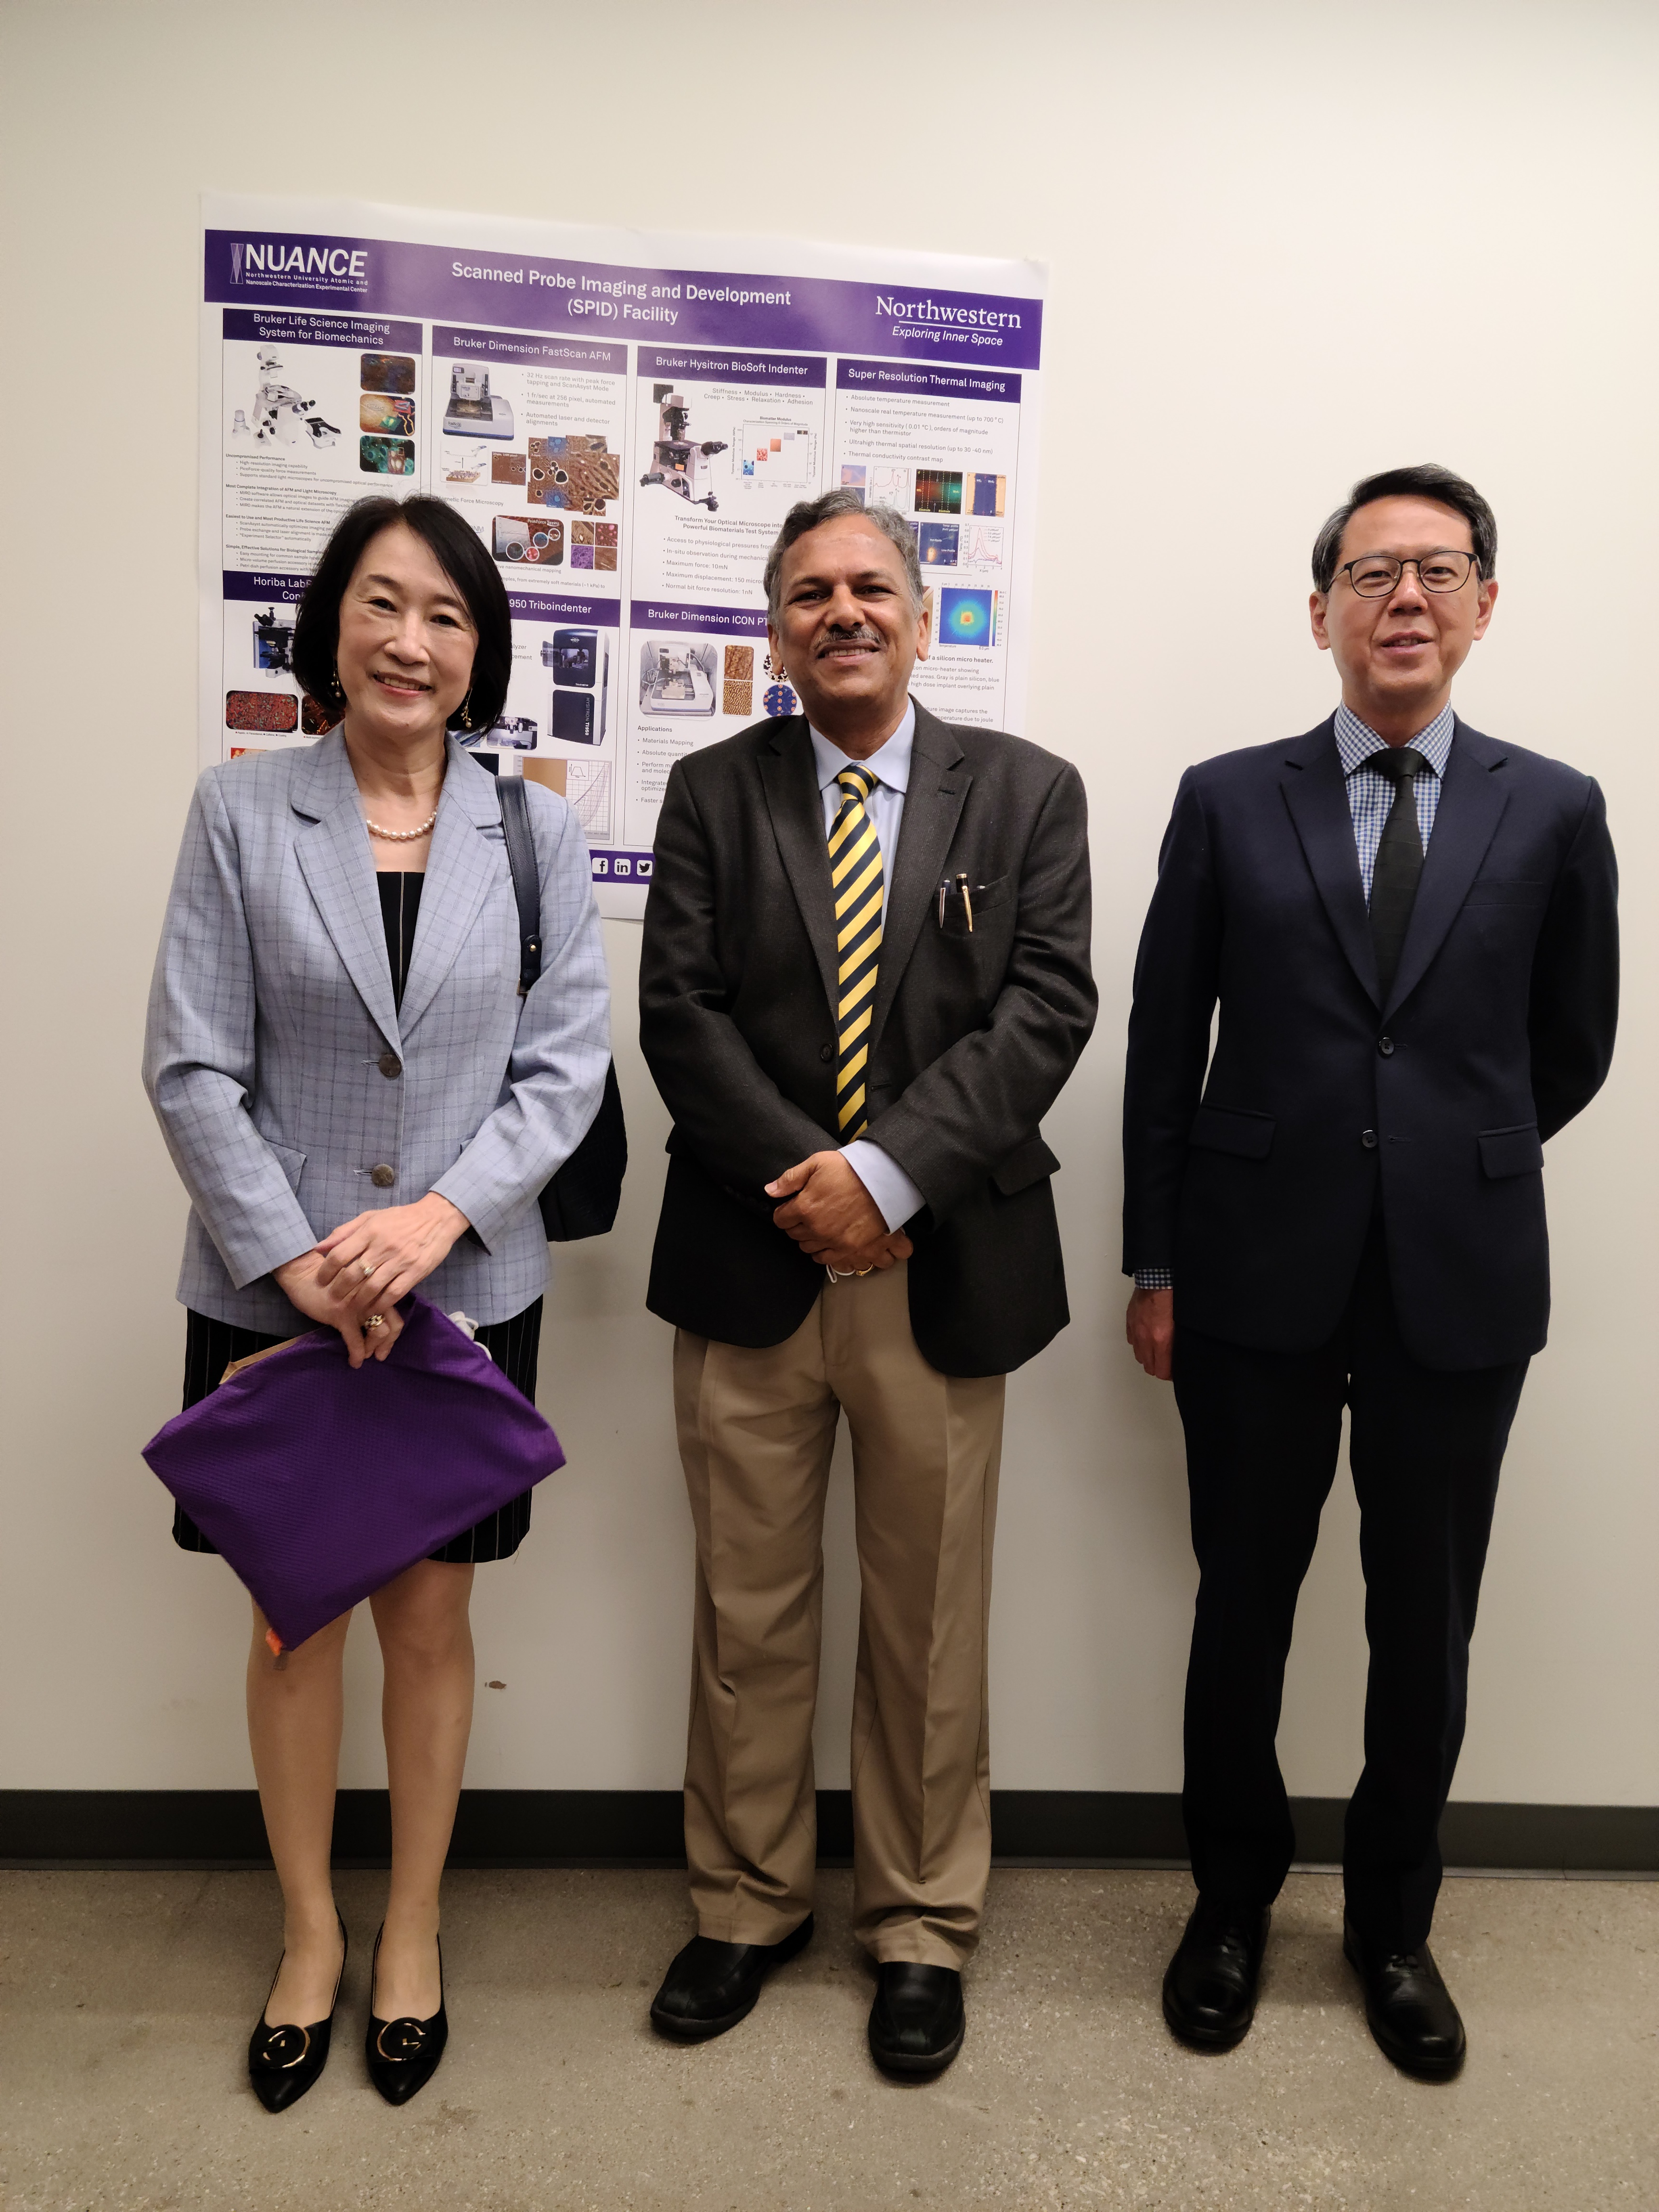 Professor Dravid with Professor Chou, Executive Vice President of National Taiwan University (left) and Johnson Sen Chiang Director General, Taipei Economic and Cultural Center in Chicago (right).  